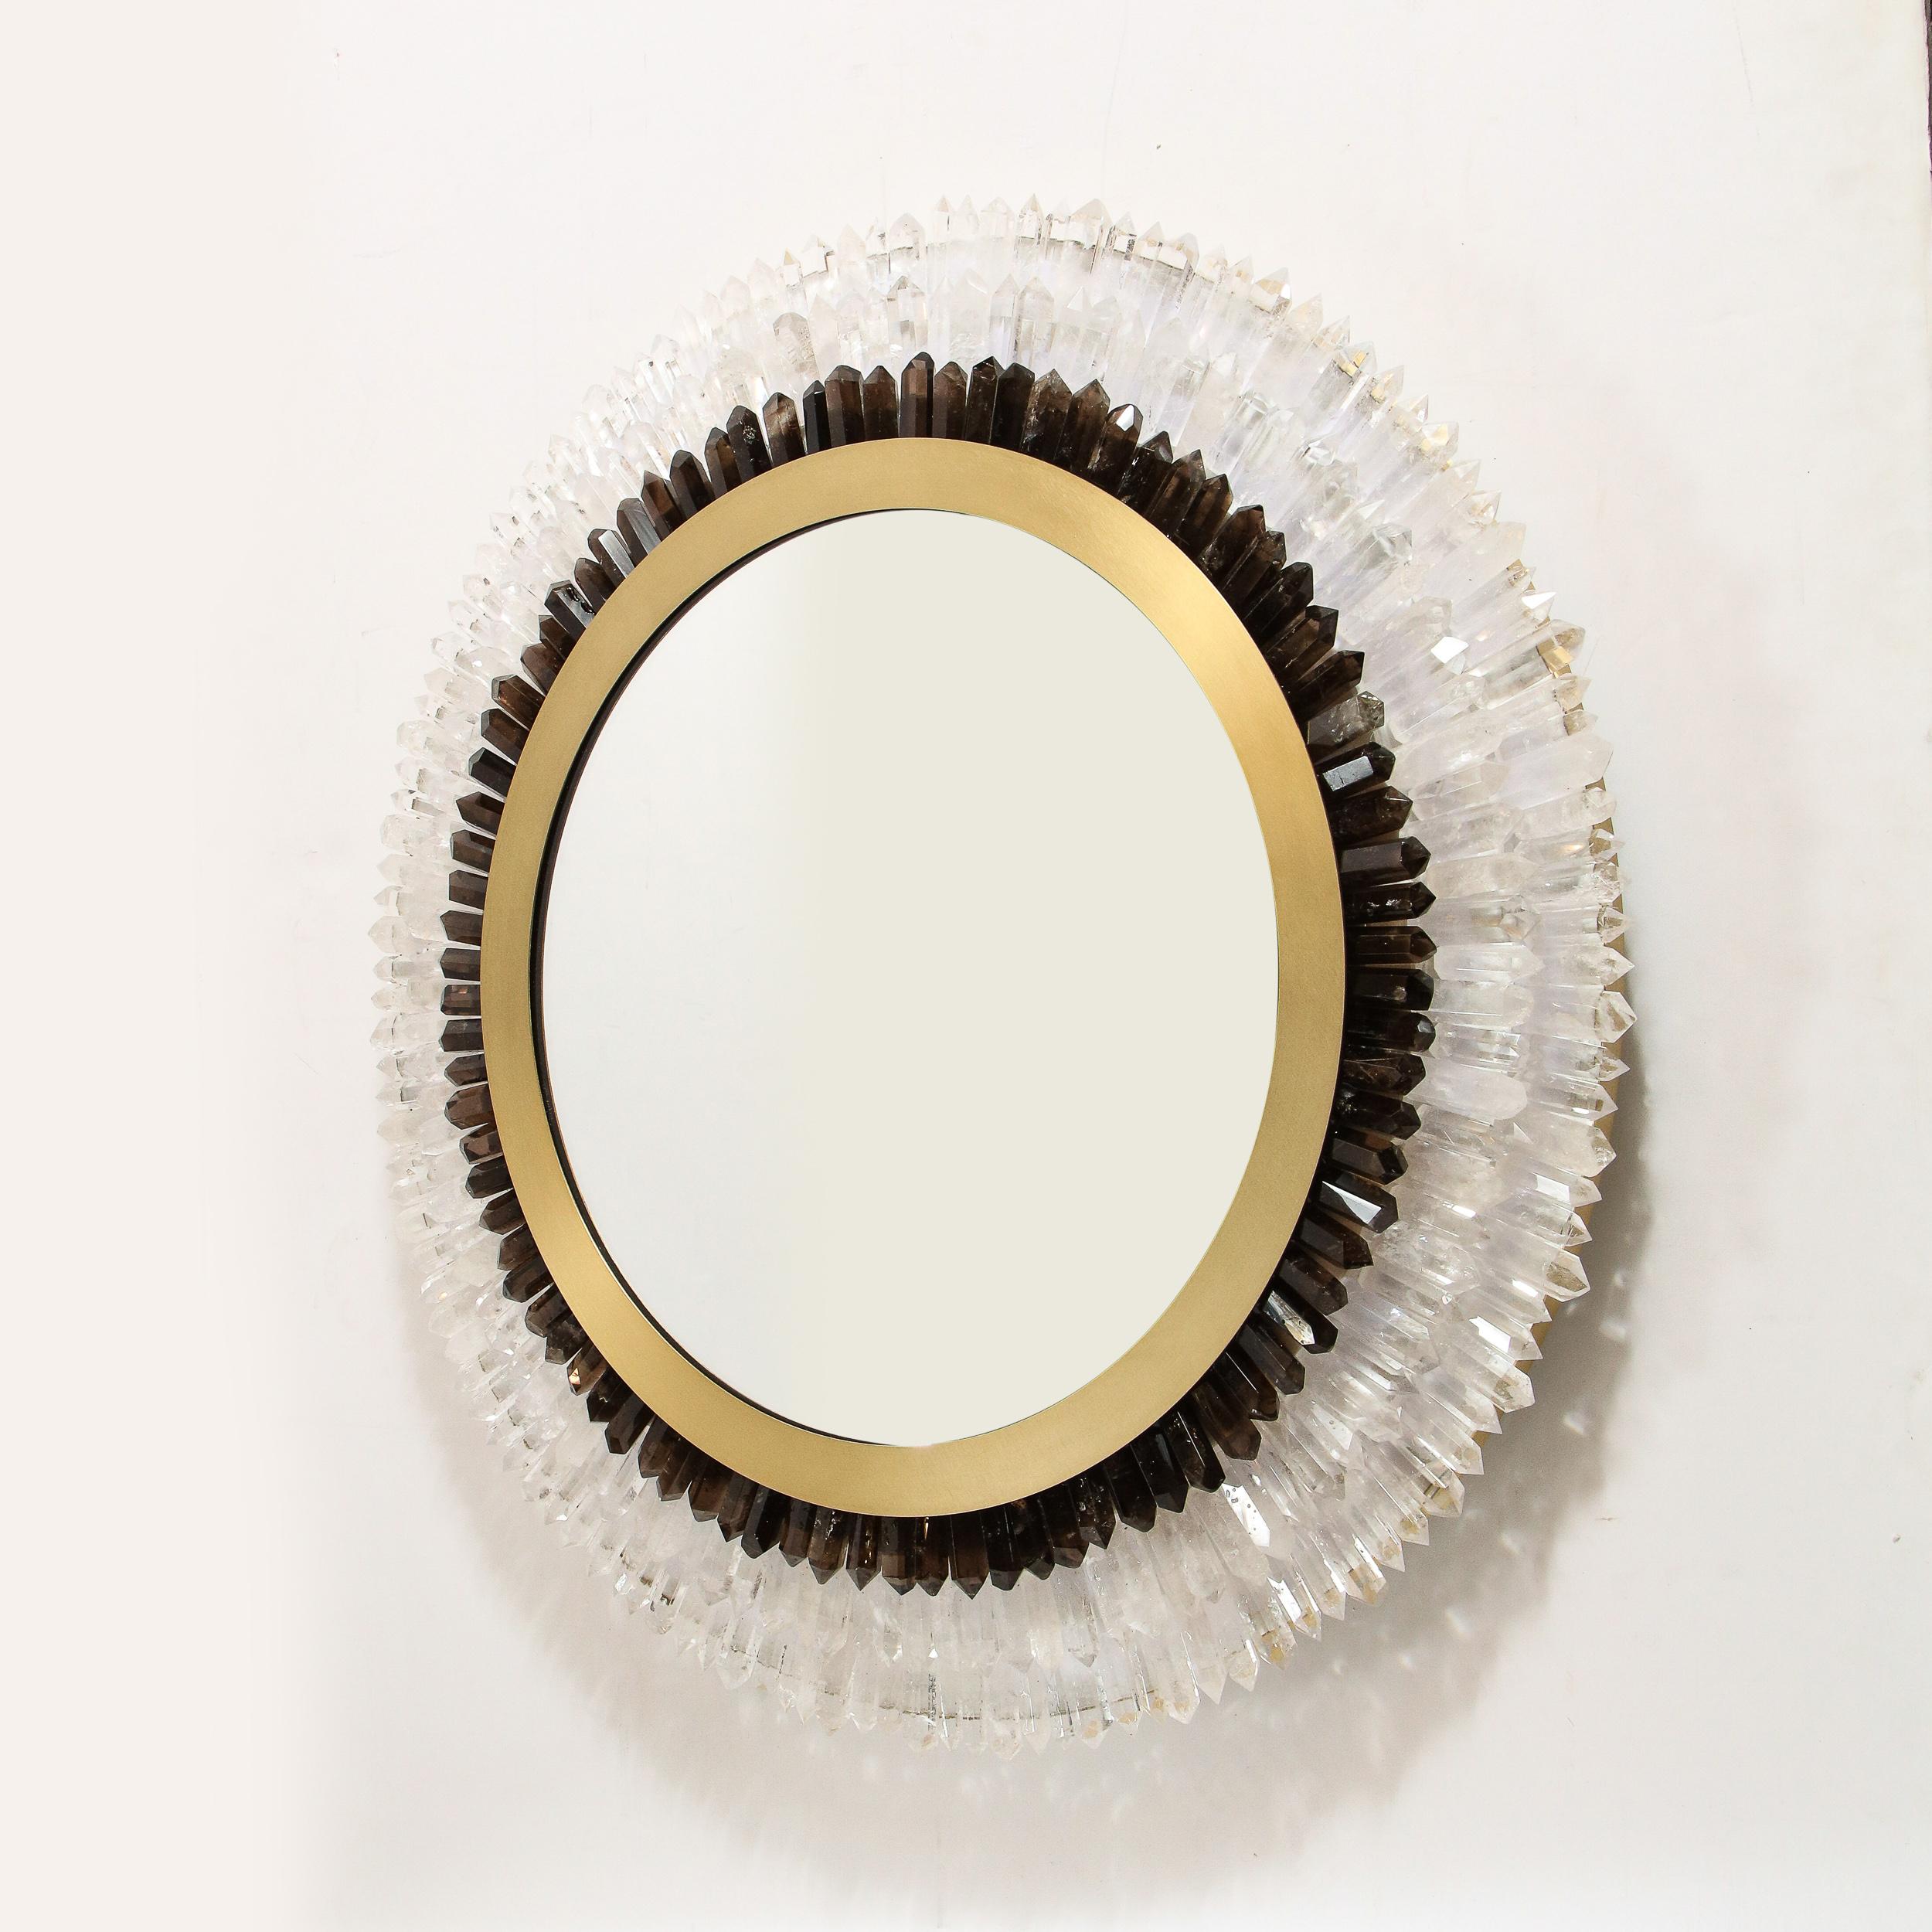 Modernist Brushed Brass, White & Smoked Rock Crystal Circular Wall Mirror For Sale 4